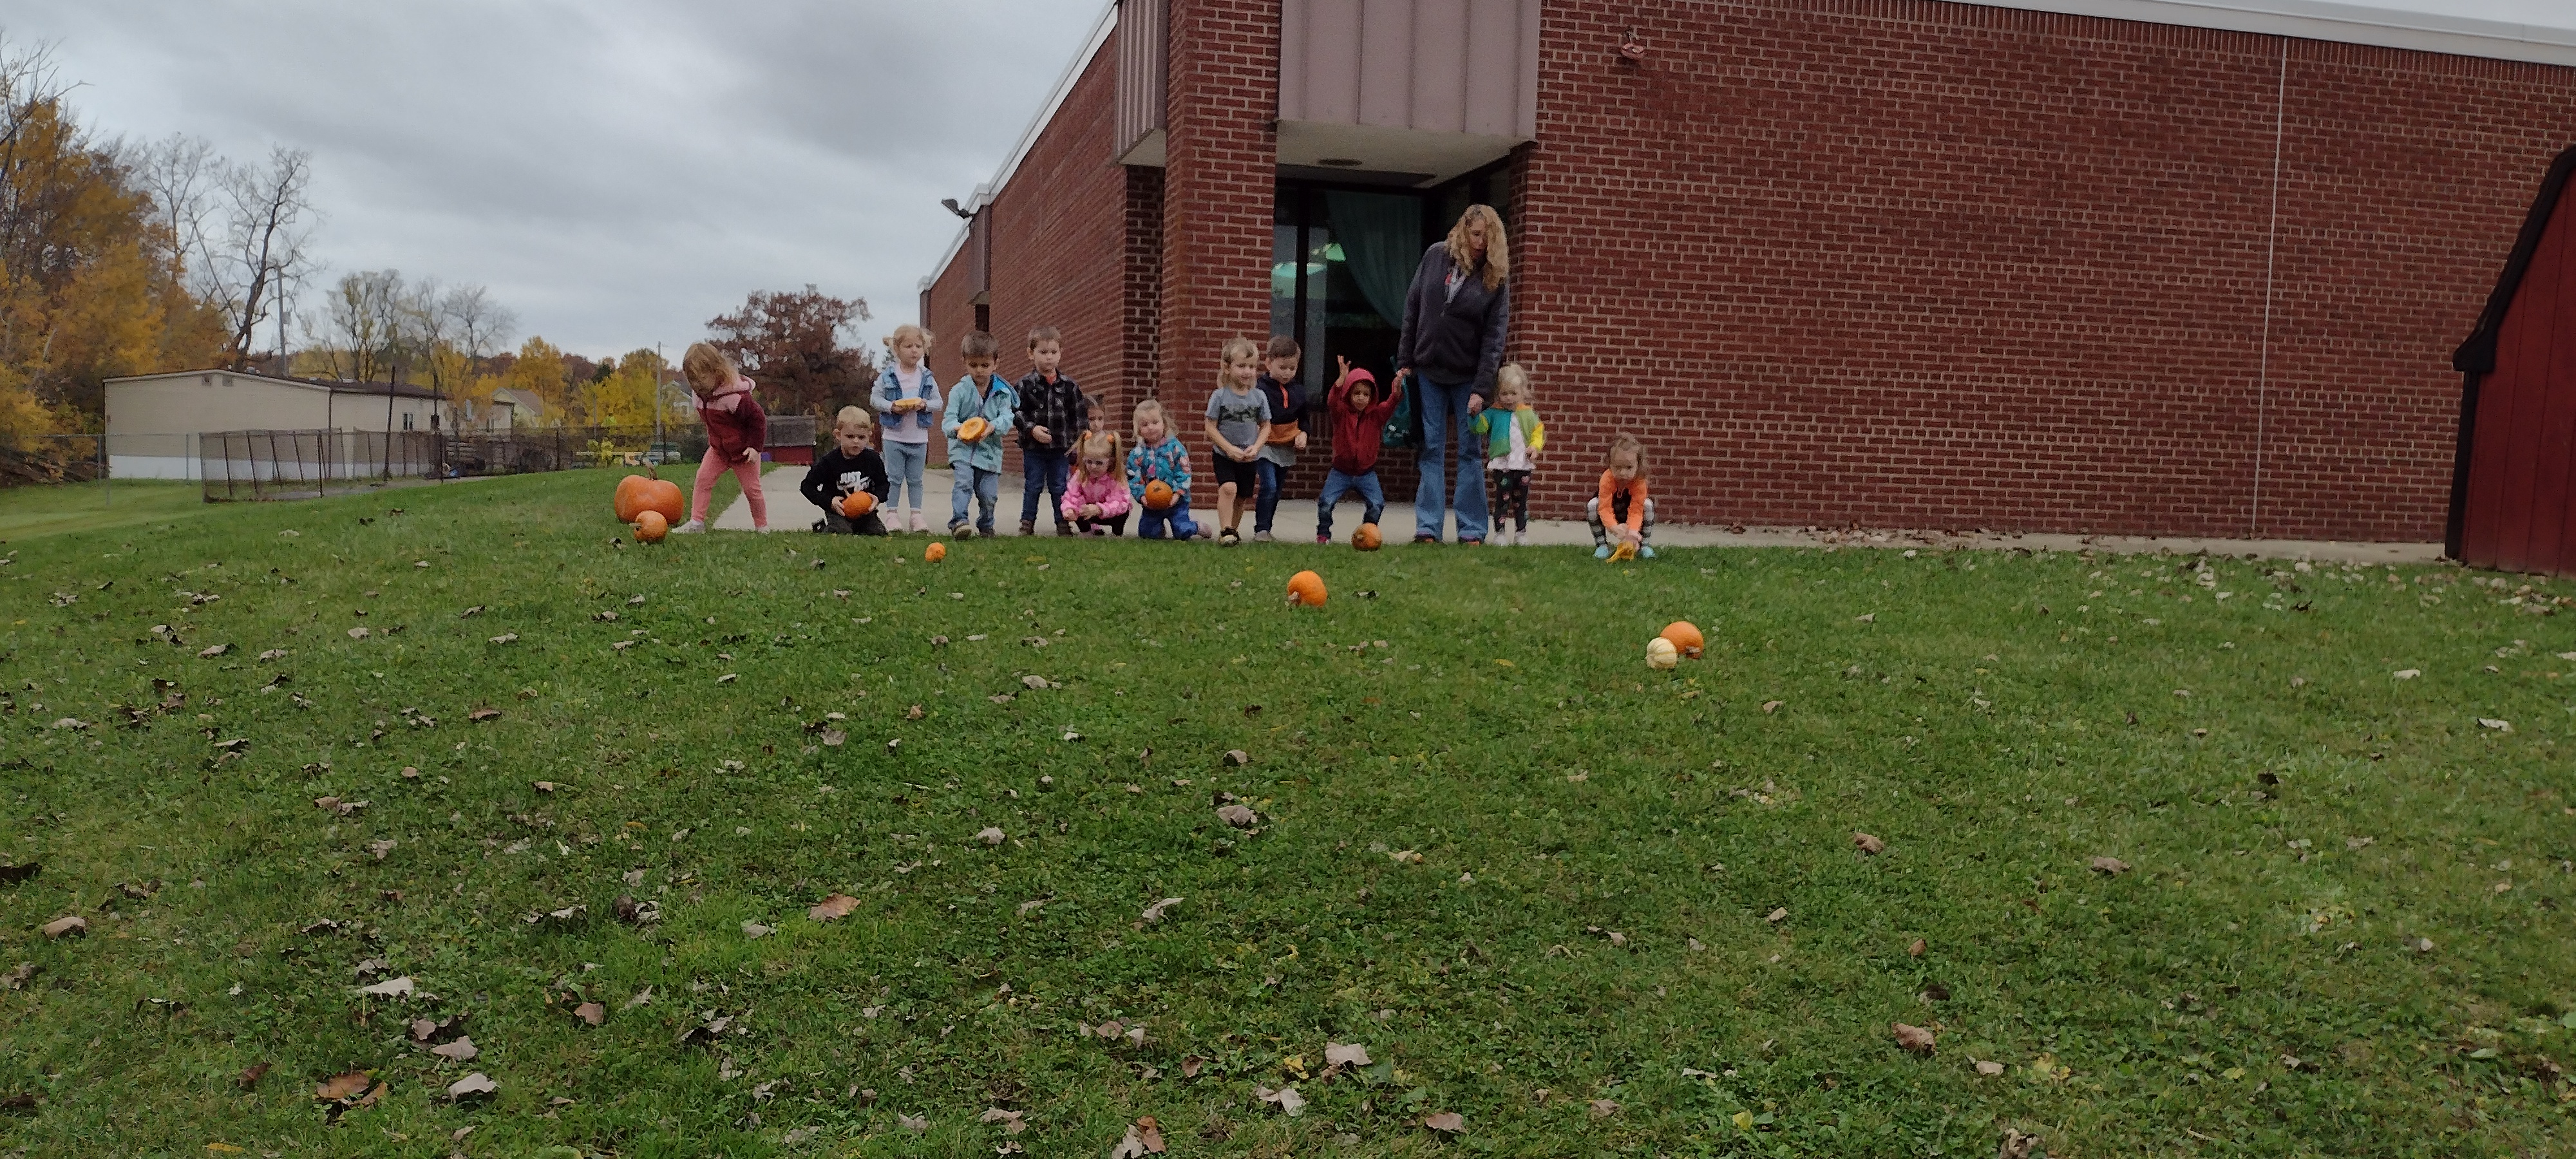 rolling pumpkins down the hill